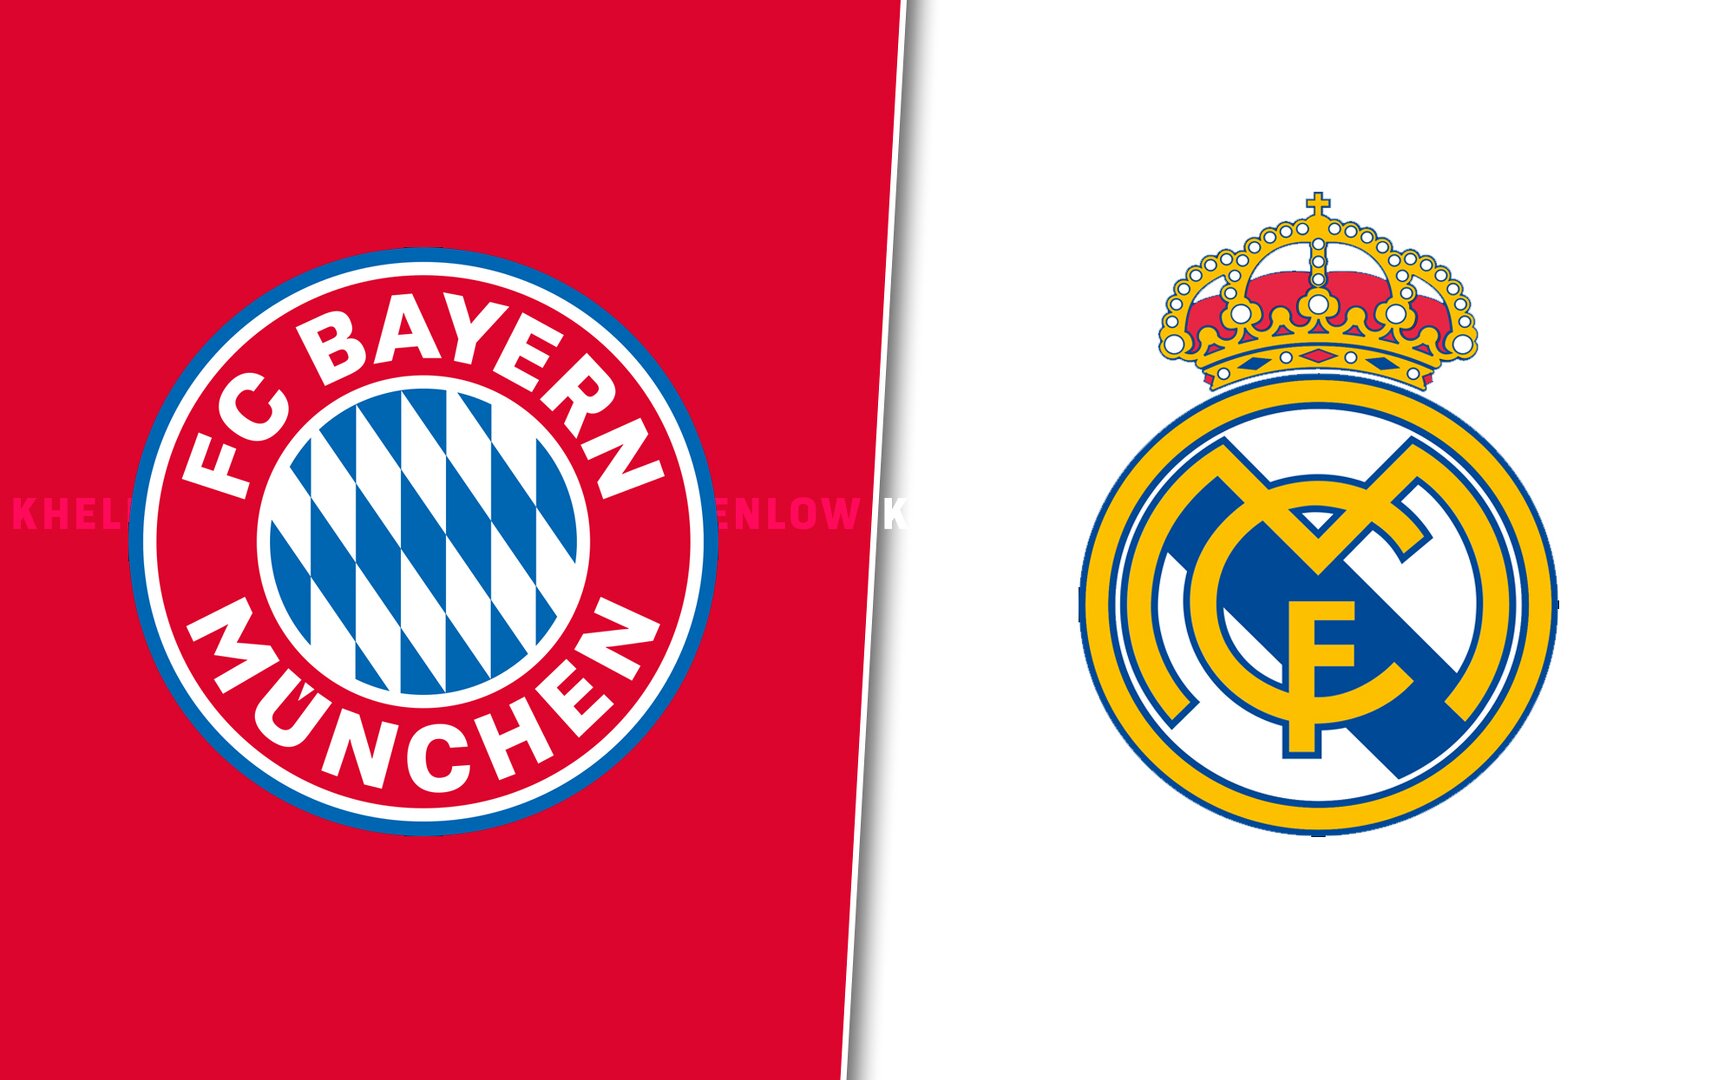 Bayern Munich vs Real Madrid Top five best Champions League matches